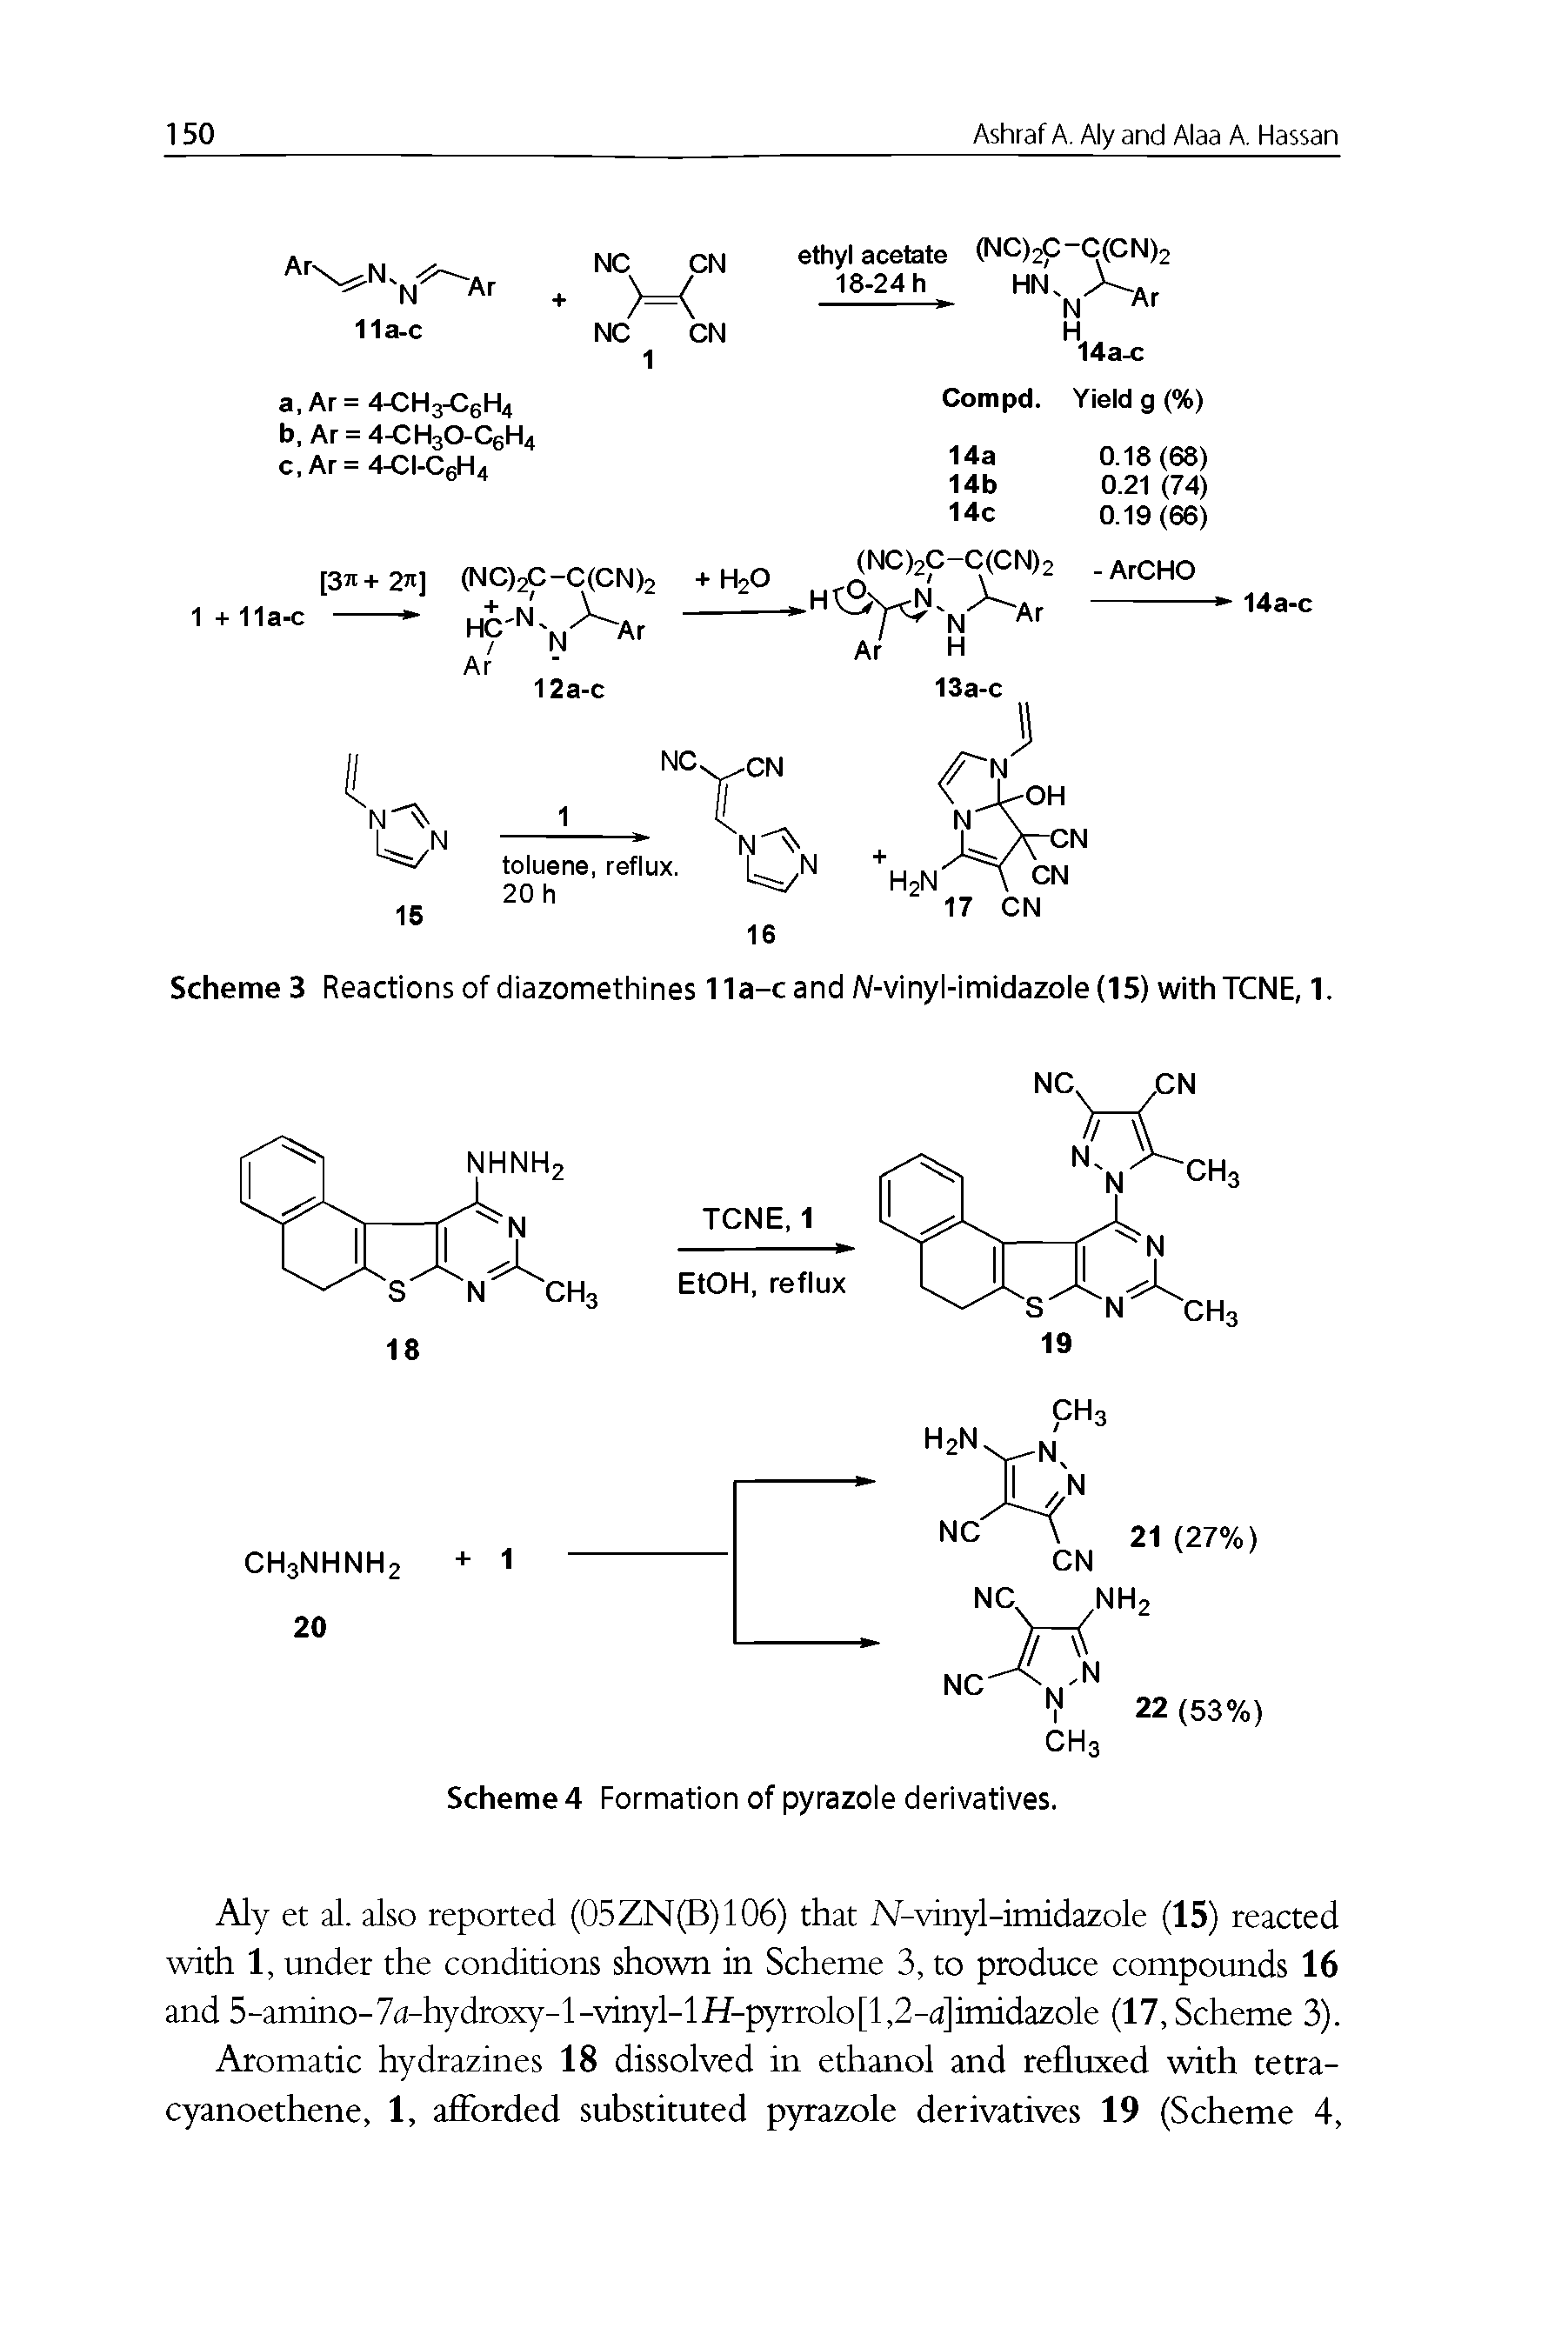 Scheme 3 Reactions of diazomethines lla-cand N-vinyl-imidazole(15) withTCNE, 1.